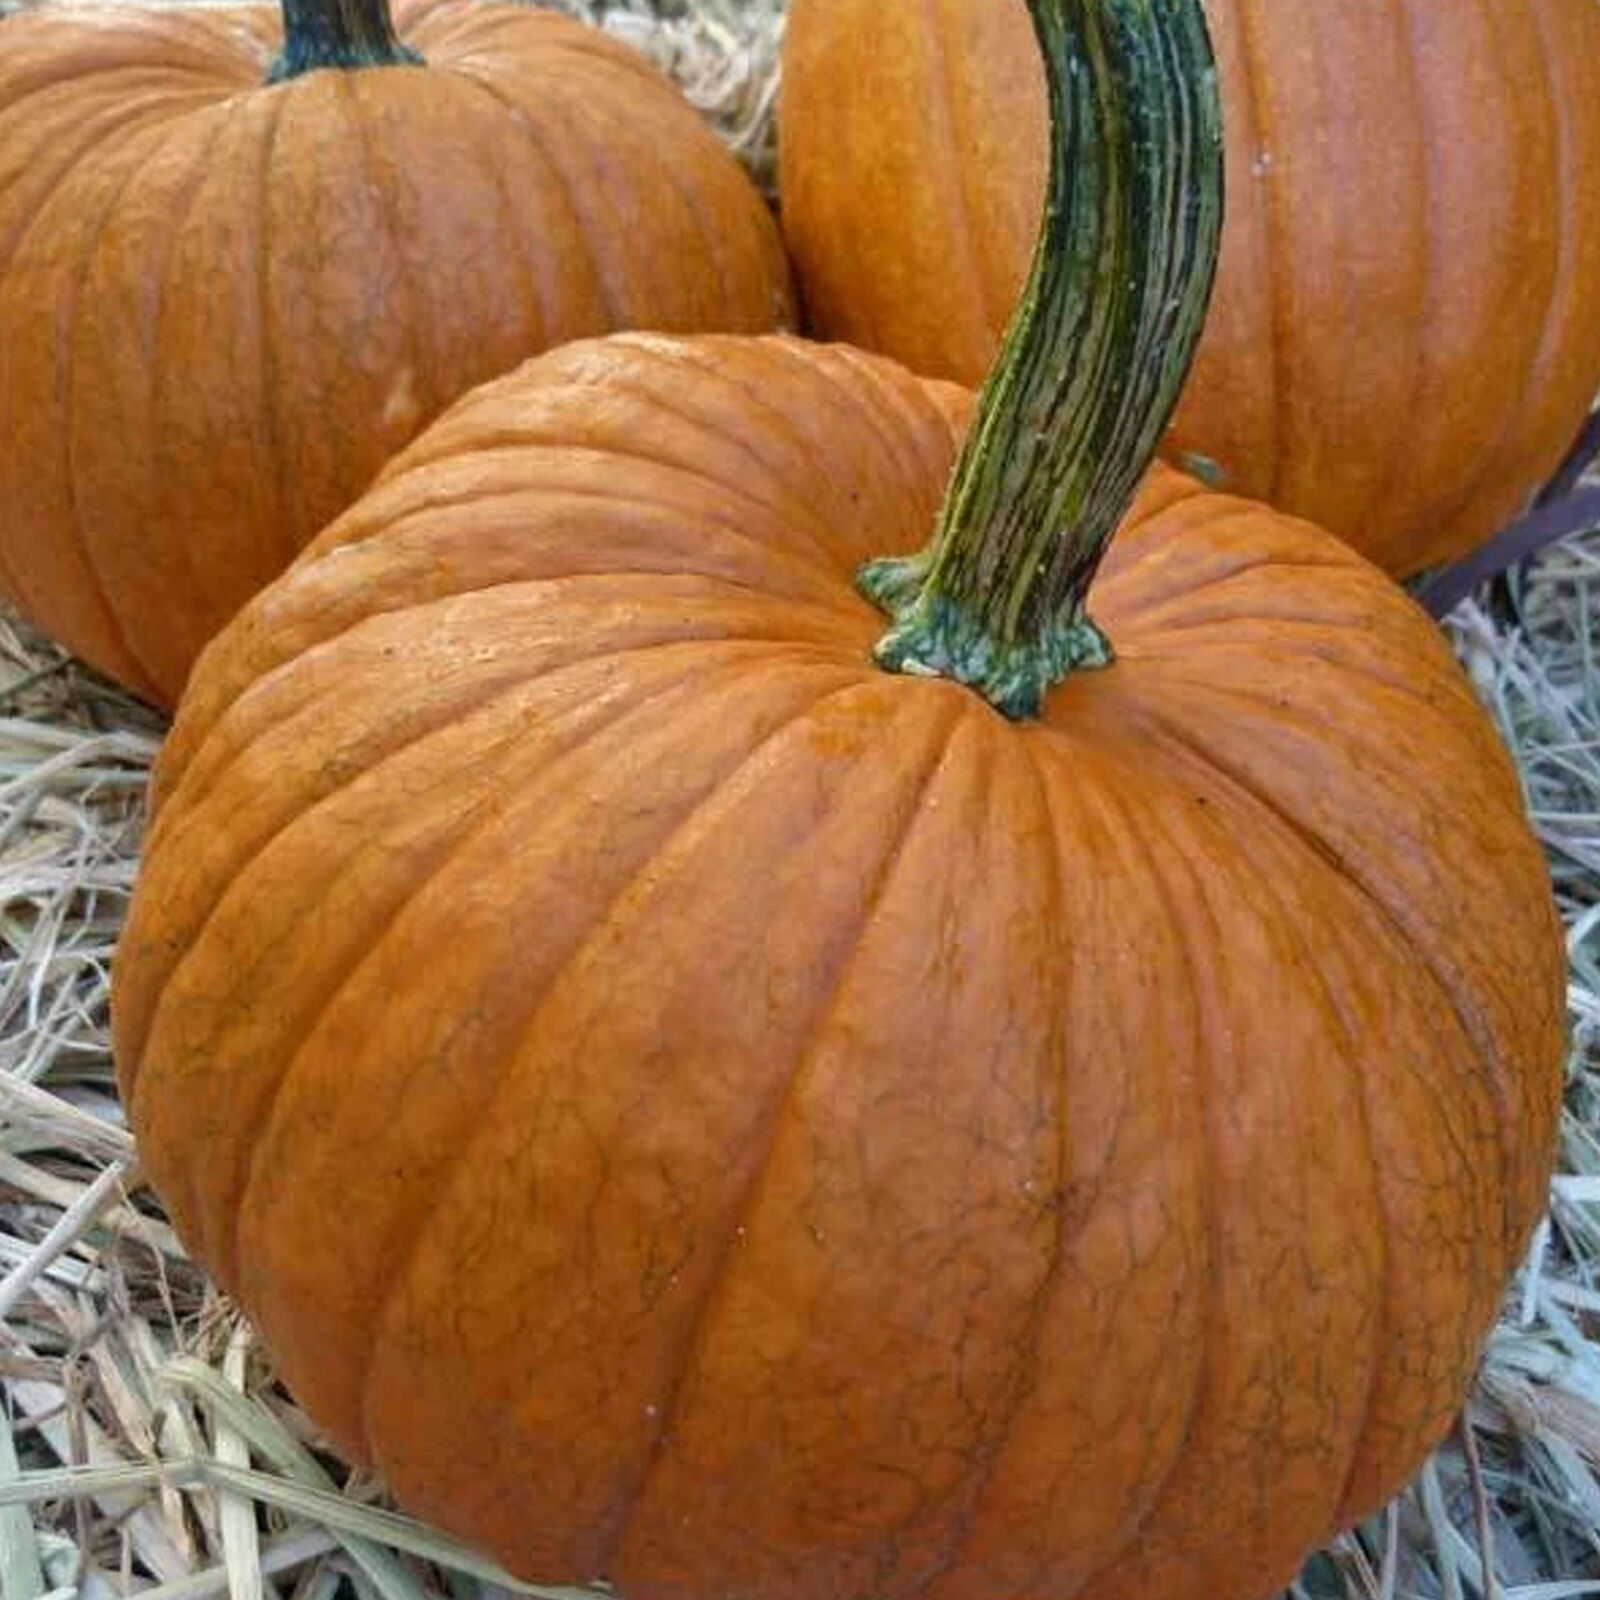 Primary image for SHIP FROM US ORGANIC SMALL SUGAR PUMPKIN SEEDS - 2 LB SEEDS - NON-GMO, TM11